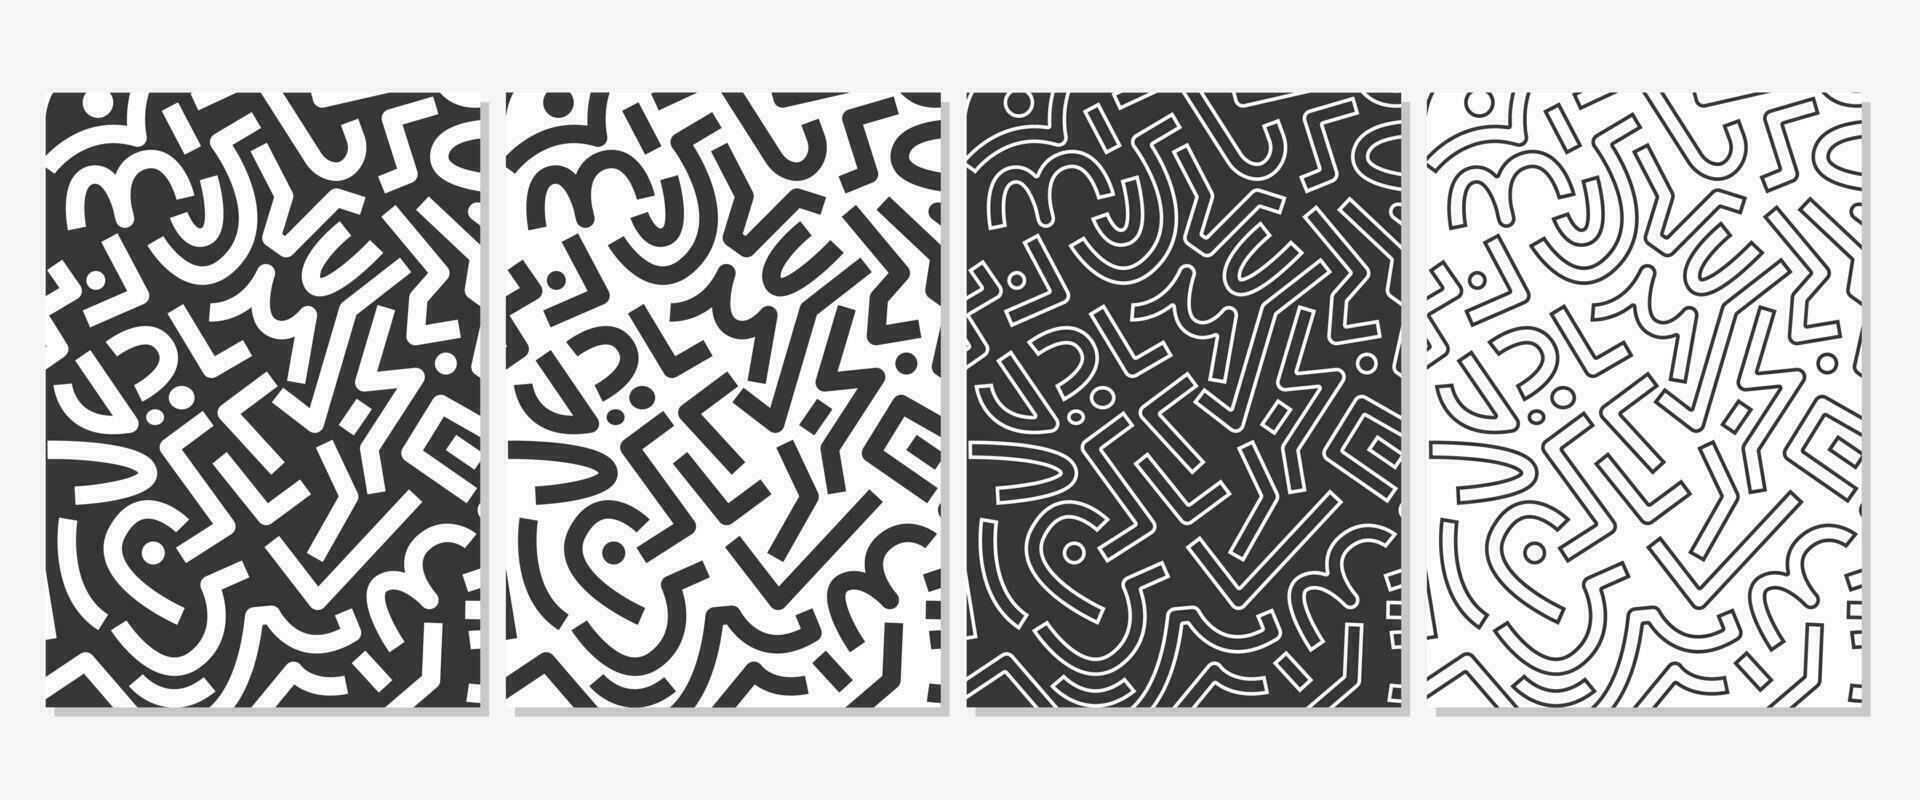 Abstract black and white geometric pattern background, vector monochrome shapes, figures, lines, circles. Trendy minimalistic set of artwork for poster, banner, flyer, cover